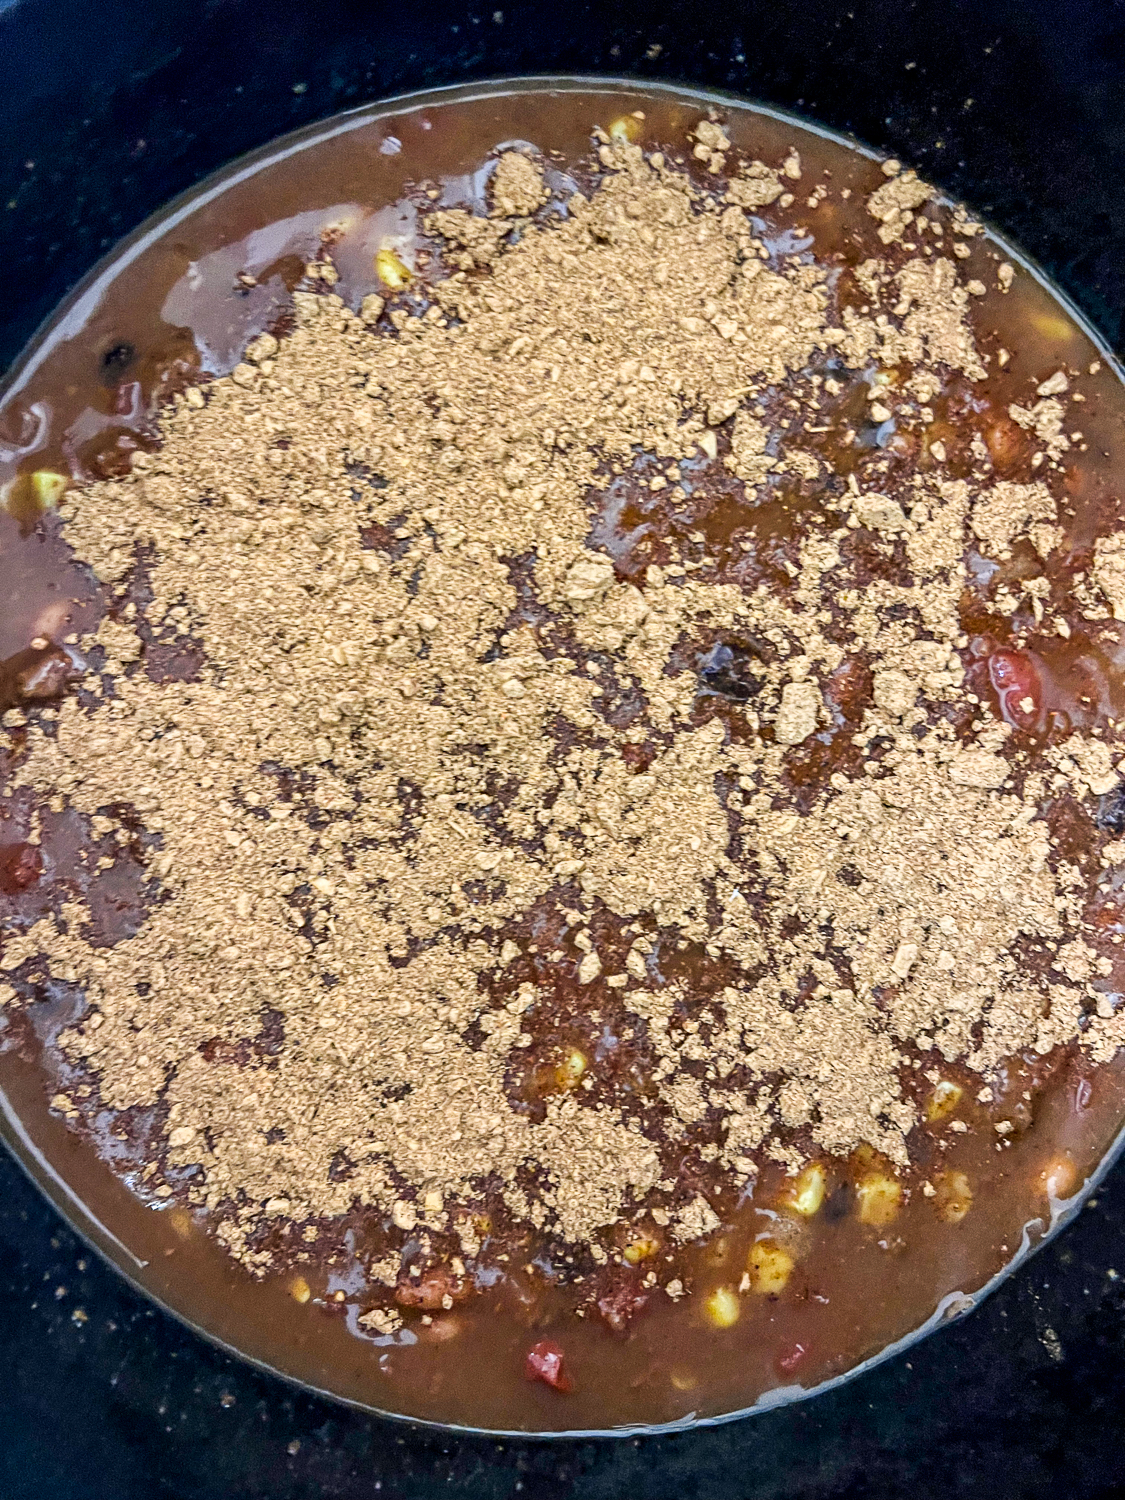 Taco seasoning packet added to the canned food in the pot.